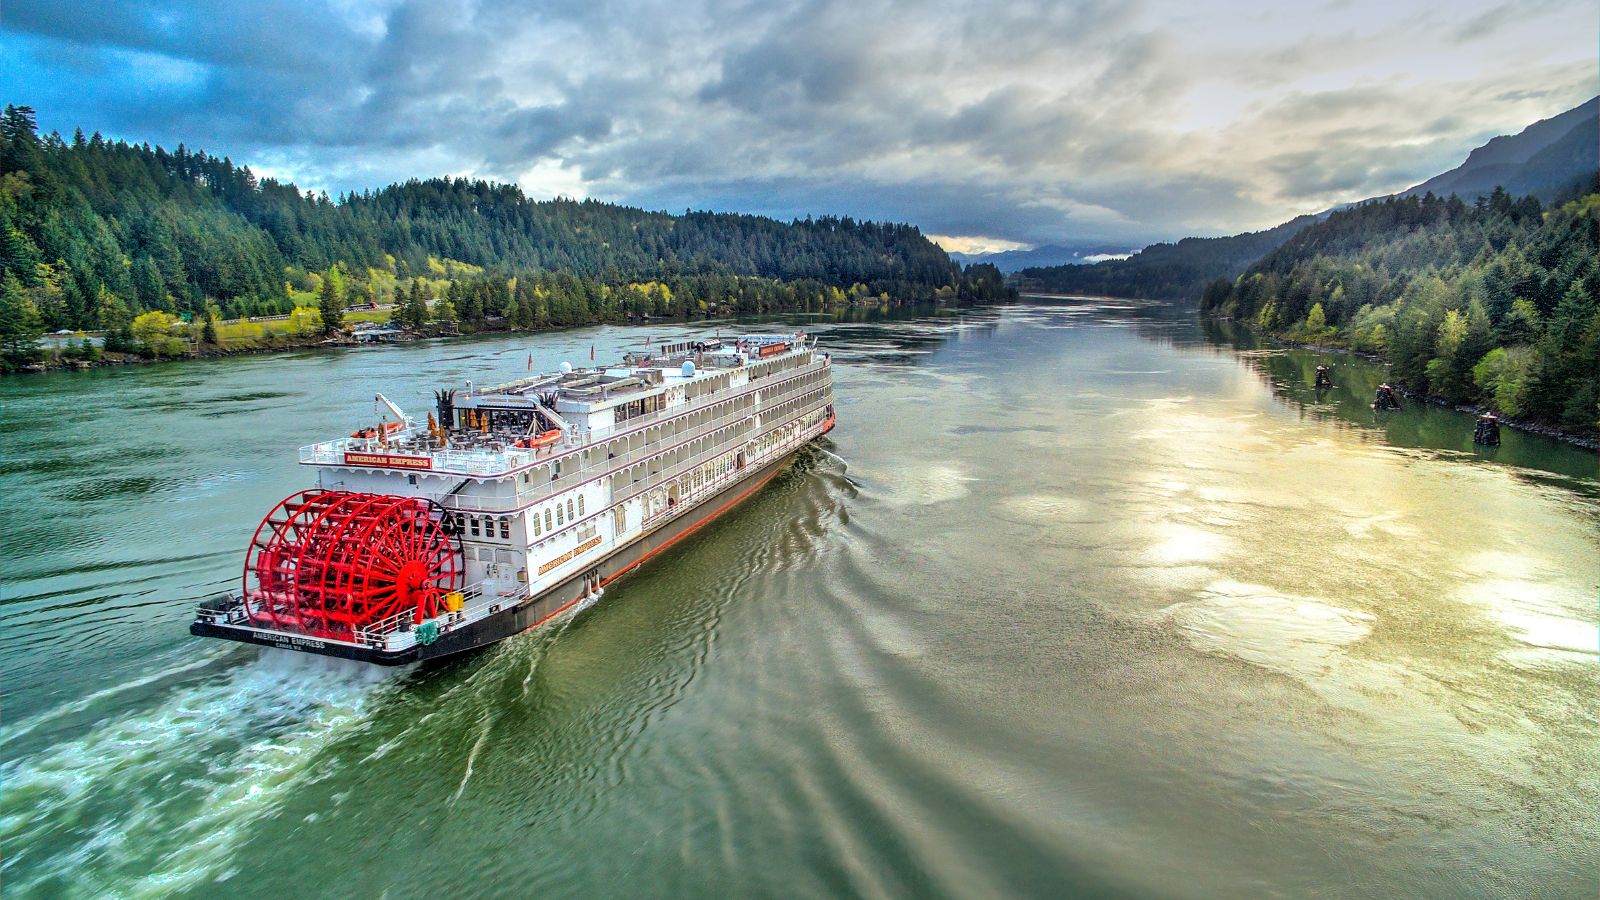 American Empress is one of four U.S. river cruise ships operated by American Queen Voyages (Photo: American Queen Voyages)